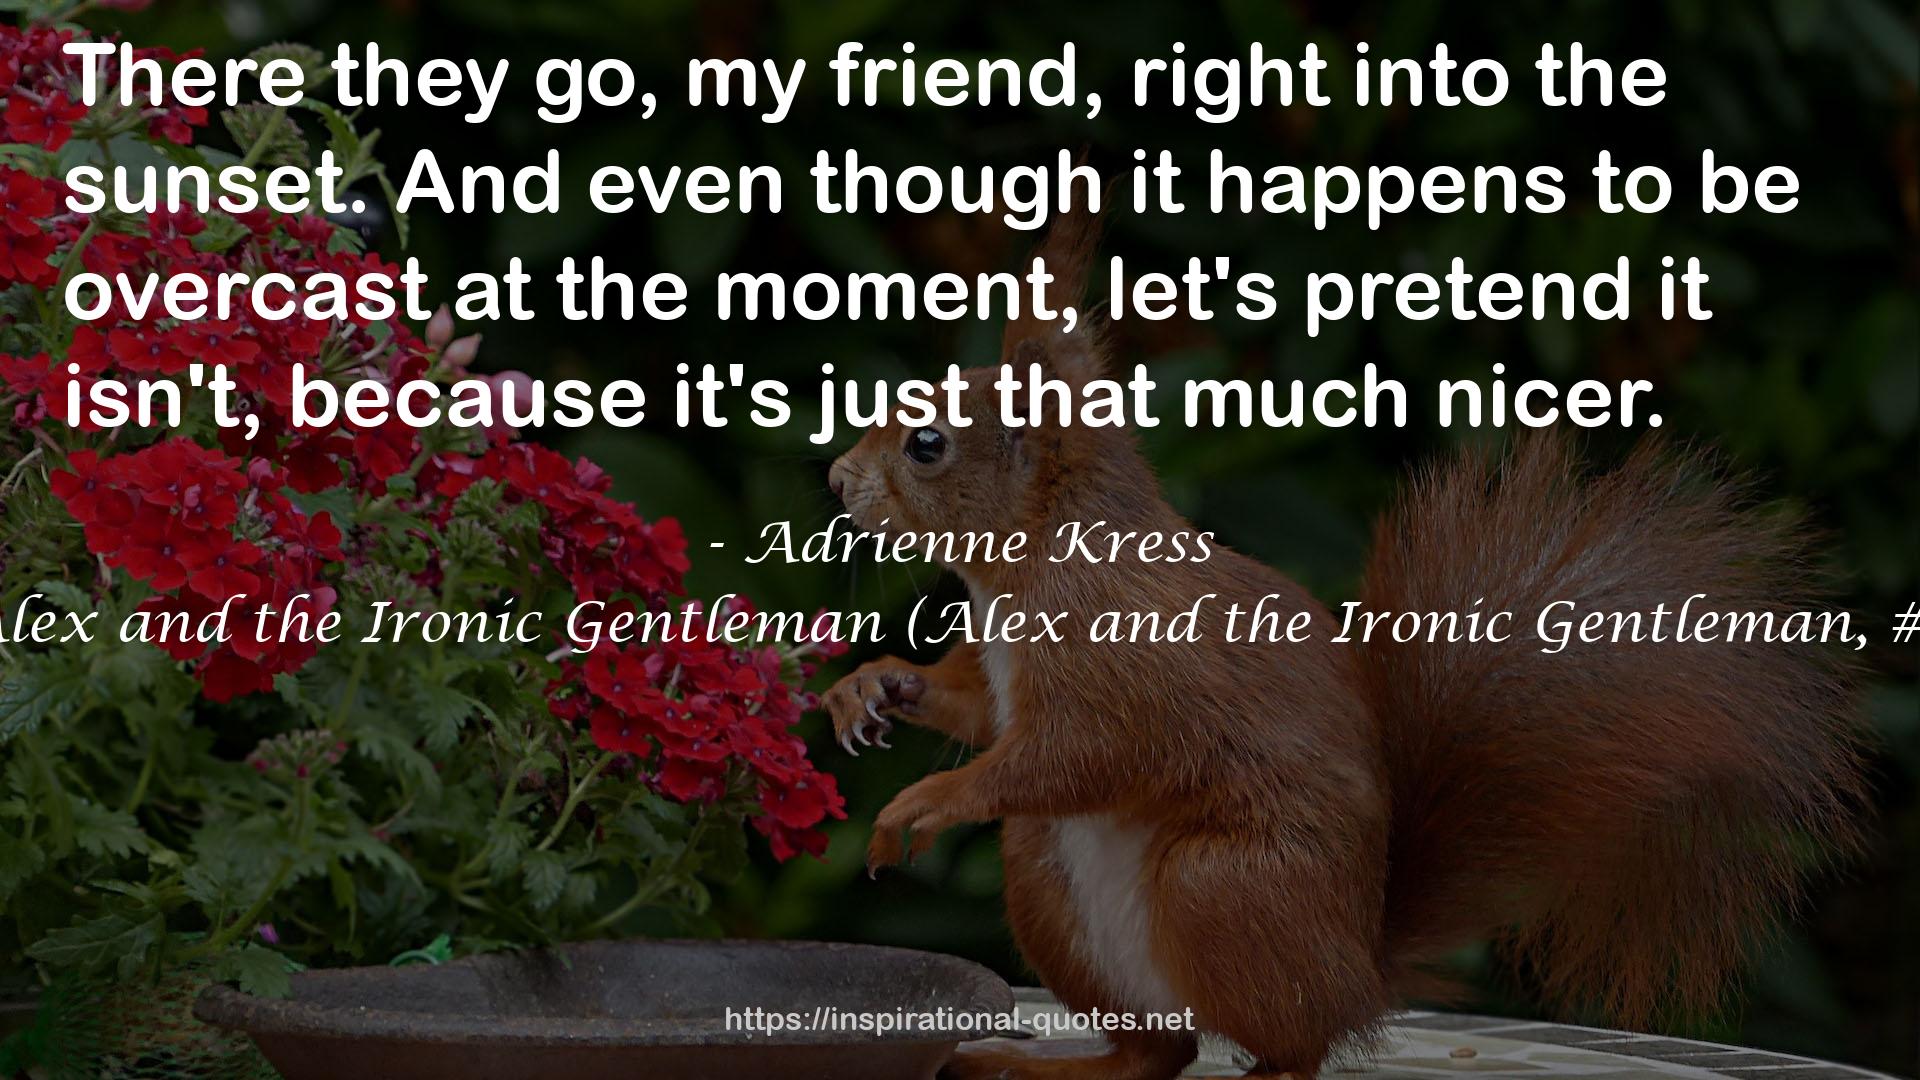 Alex and the Ironic Gentleman (Alex and the Ironic Gentleman, #1) QUOTES